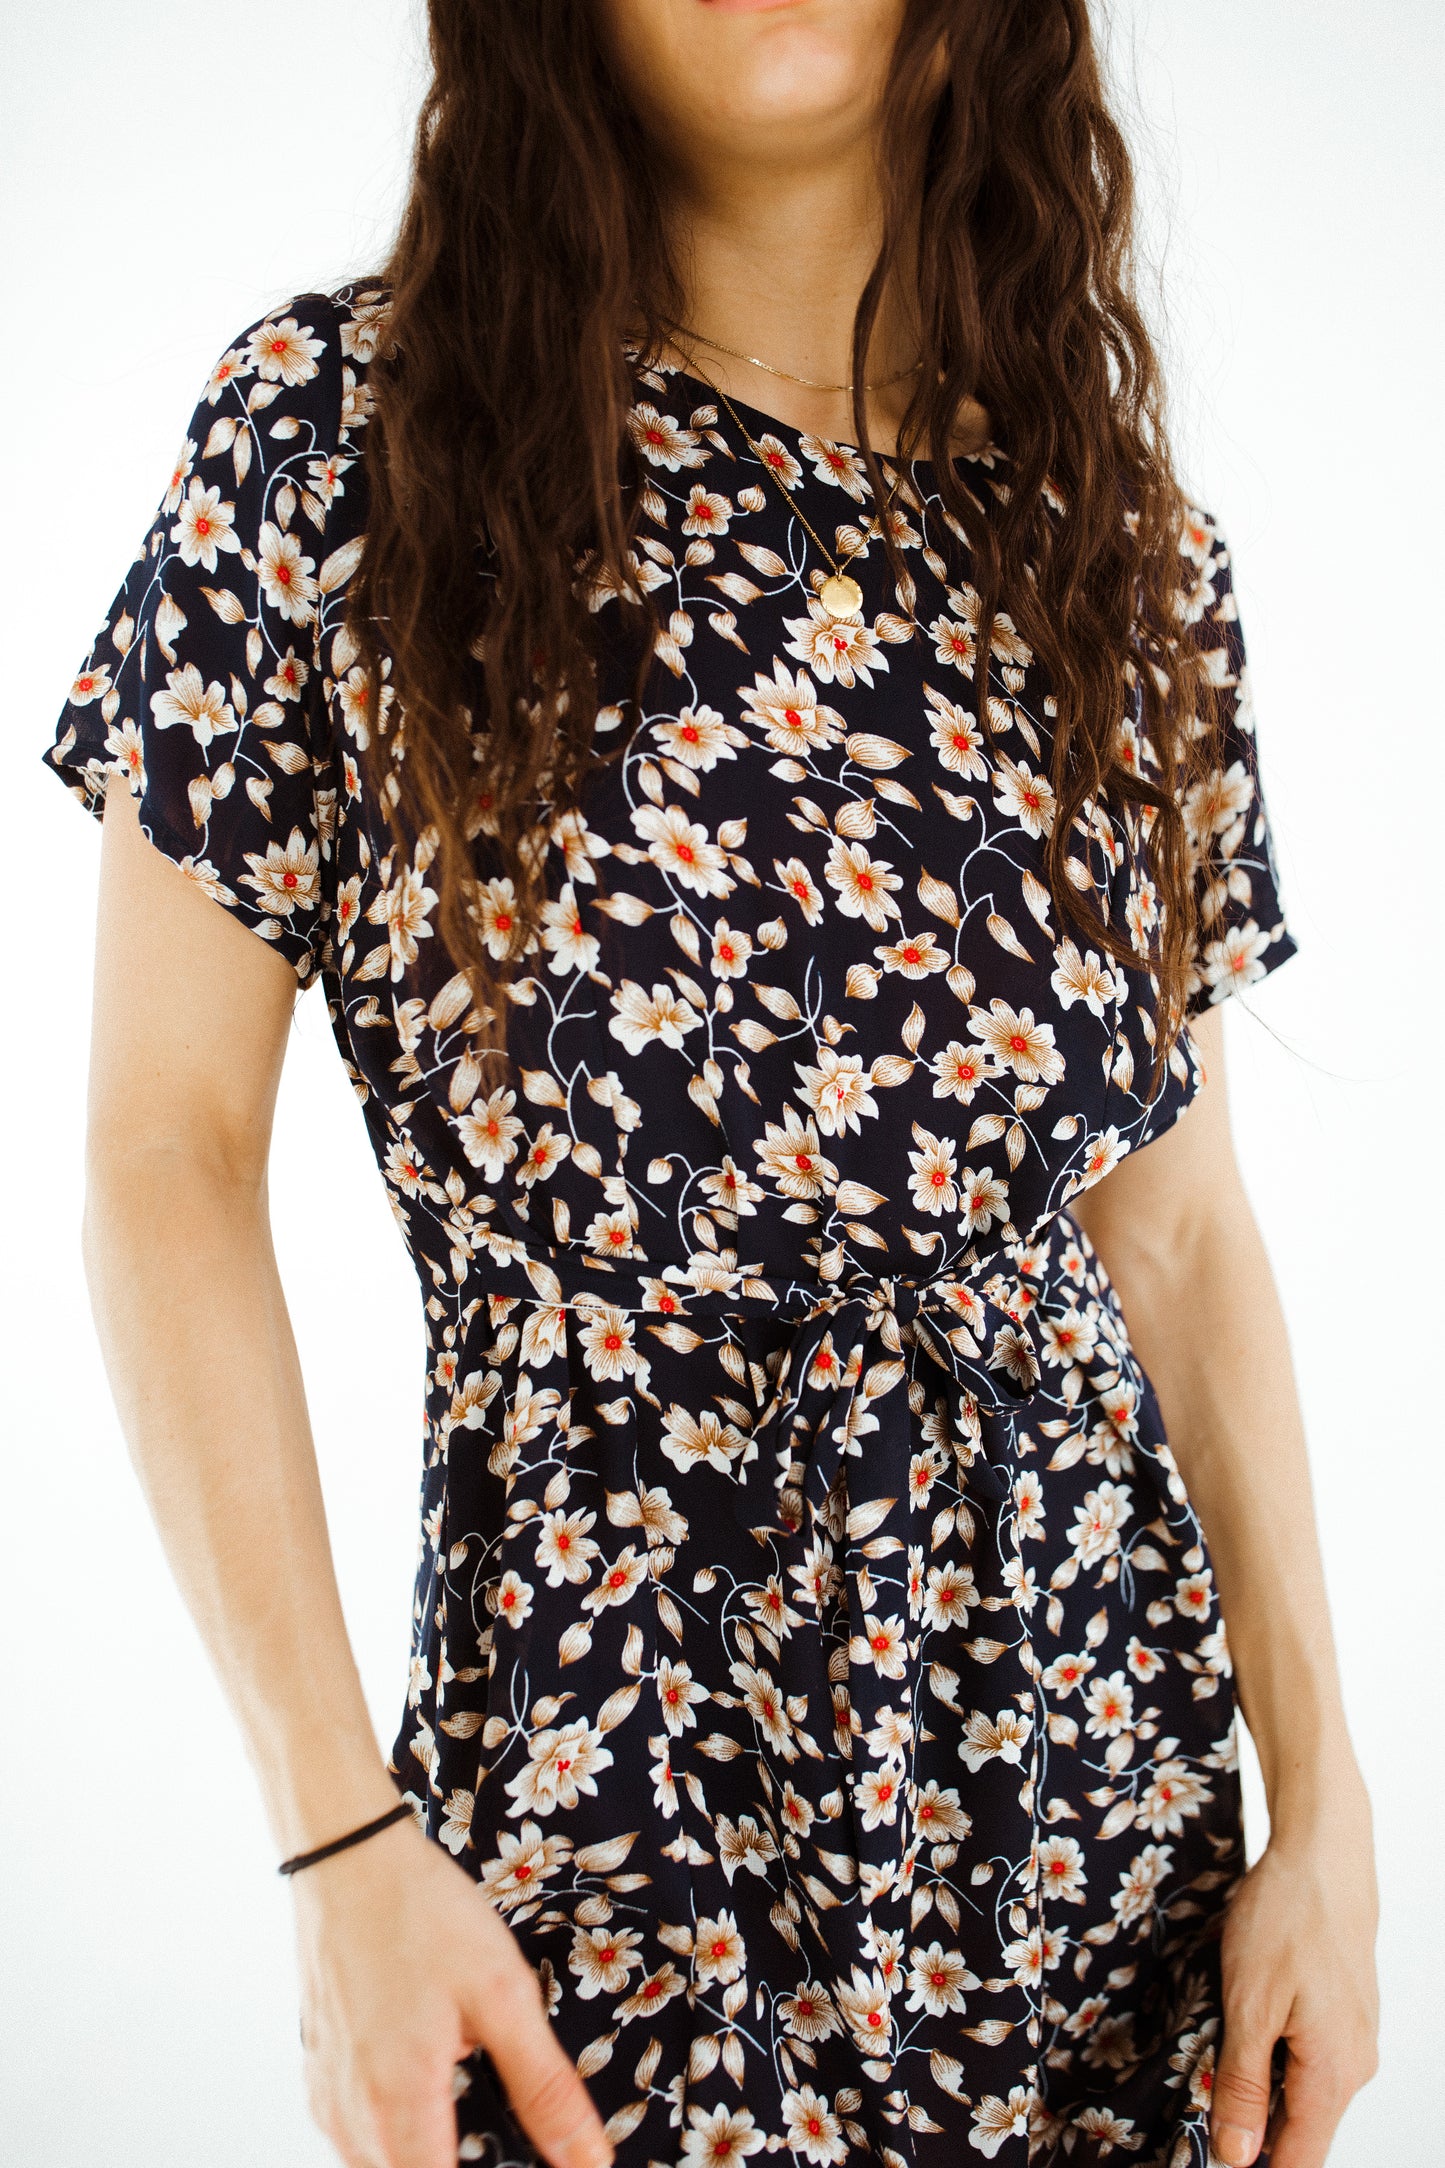 The Floral Dress